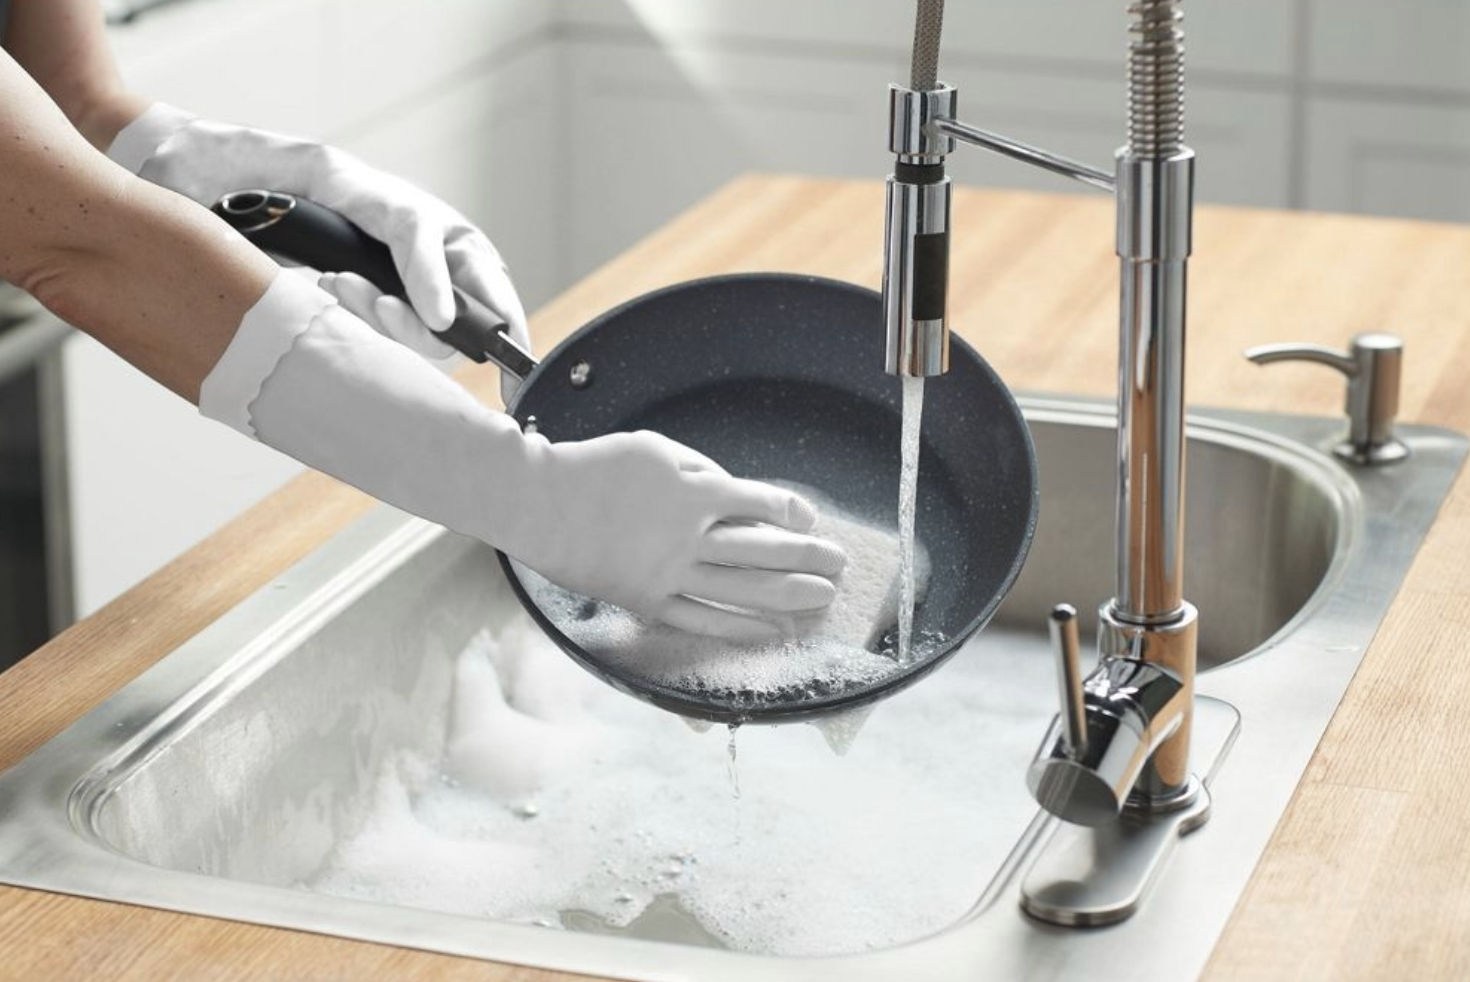 Person washing a non-stick frying pan in a kitchen sink with soapy water